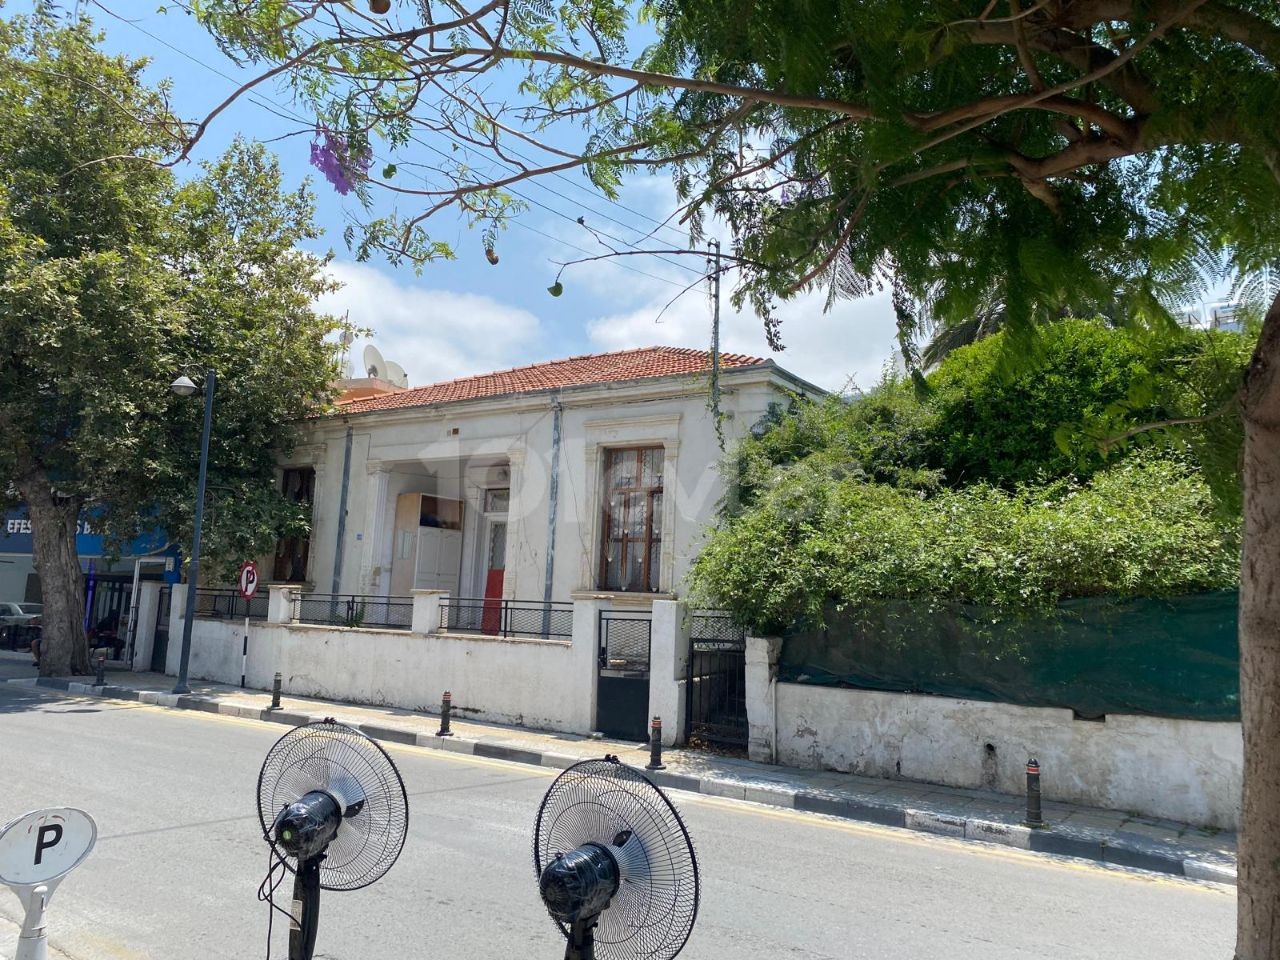 Detached commercial house for sale on the main street in Alsancak, Kyrenia. use. very suitable for businesses such as kindergarten clinic restaurant etc. price 180000 pounds